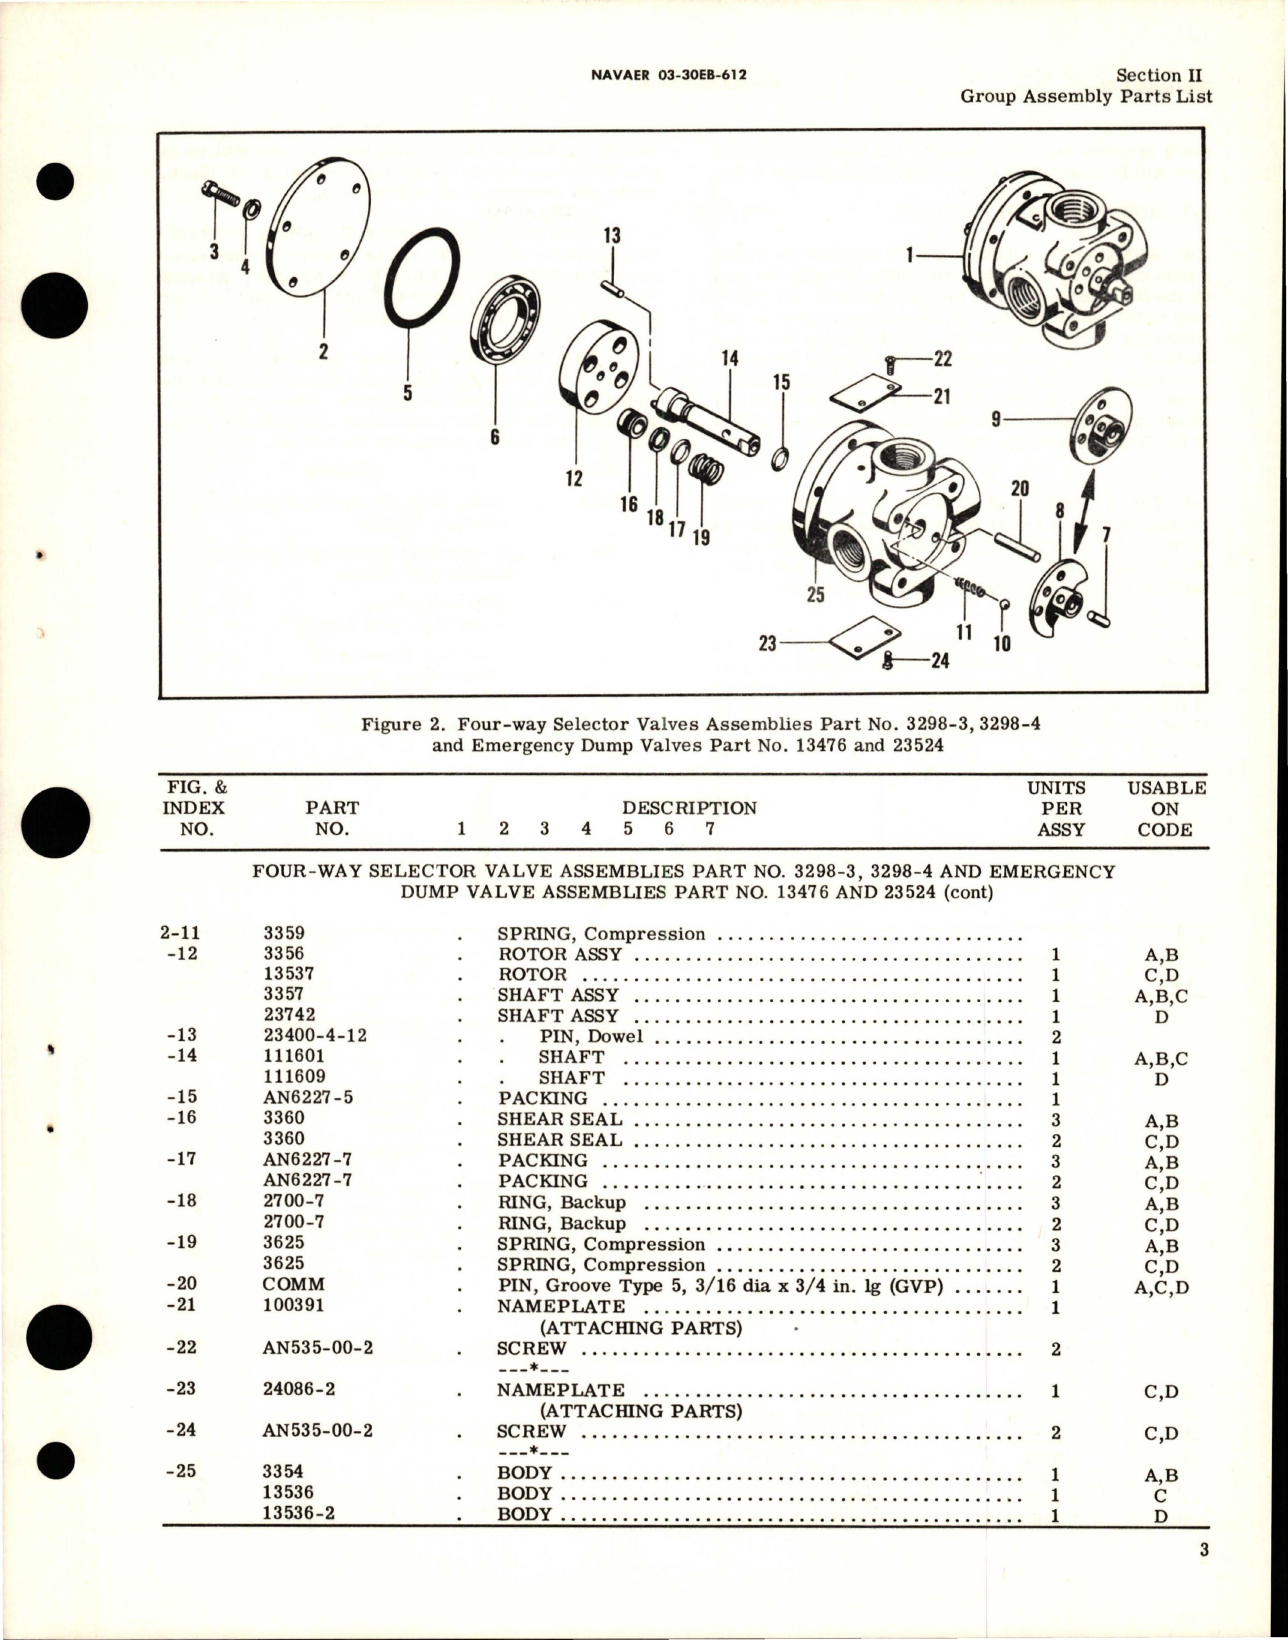 Sample page 5 from AirCorps Library document: Illustrated Parts Breakdown for Rotary Selector Valves